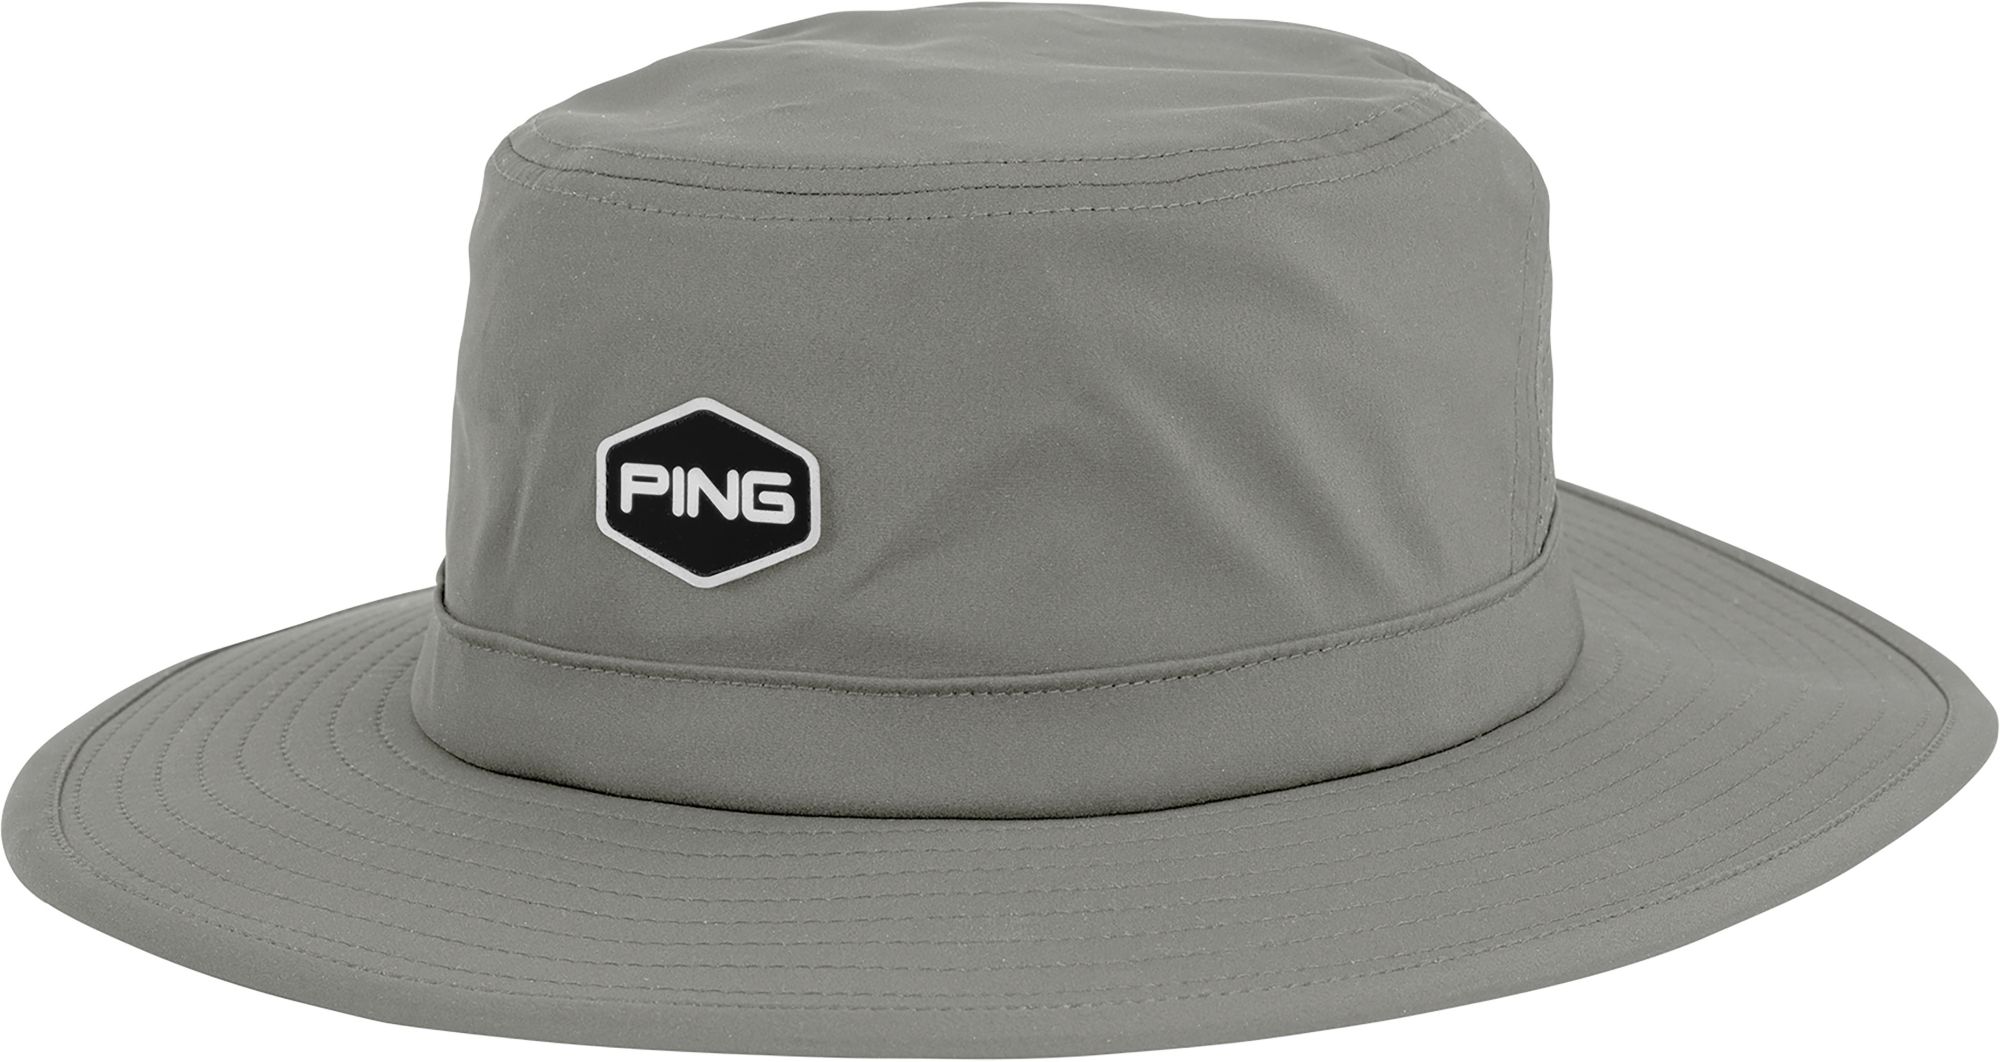 PING Mens Golf Boonie Bucket Hat Grey Adjustable One Size New #2929